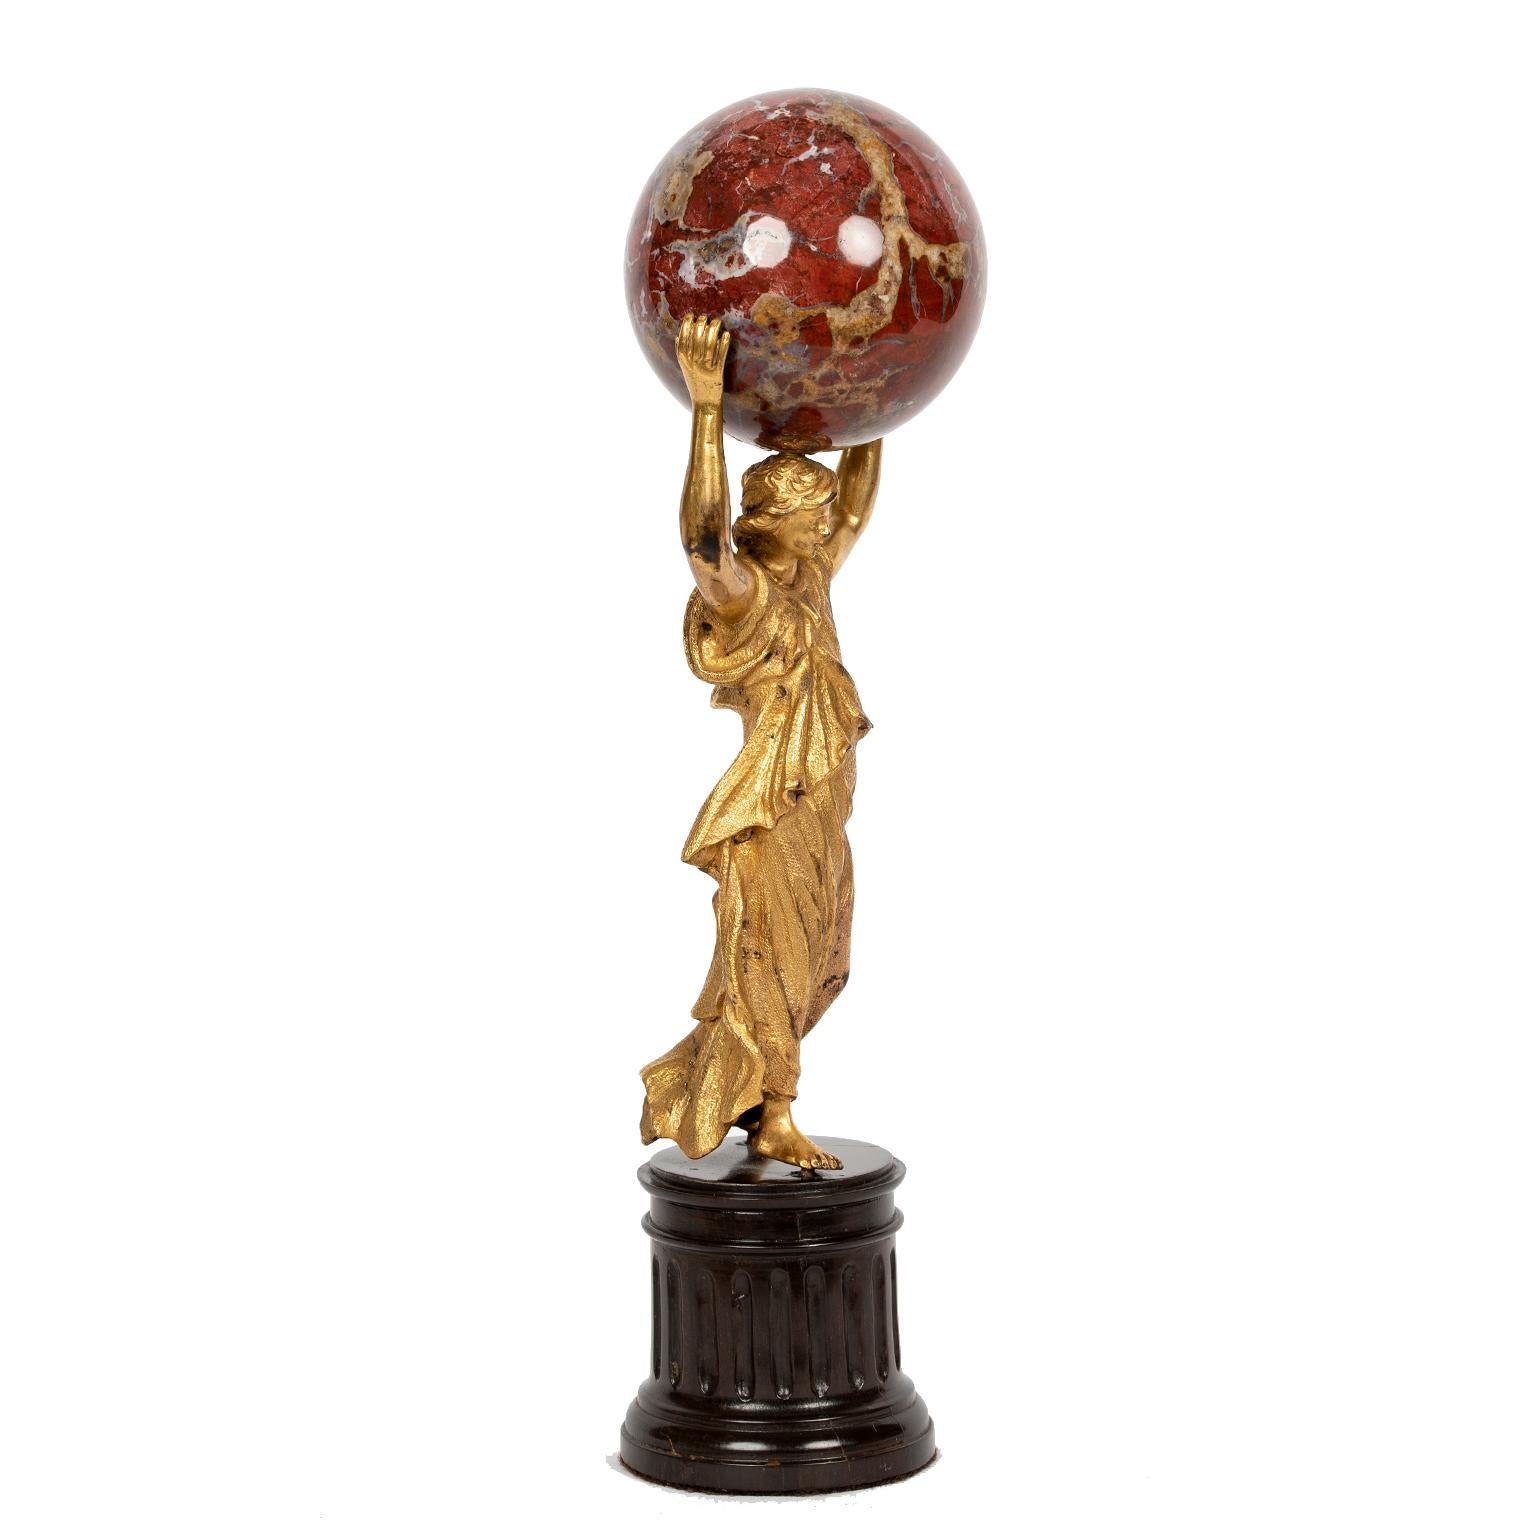 A gorgeous Continental classical gilt caryatid figure on a dark wood column base, holding a rouge marble ball (attached).